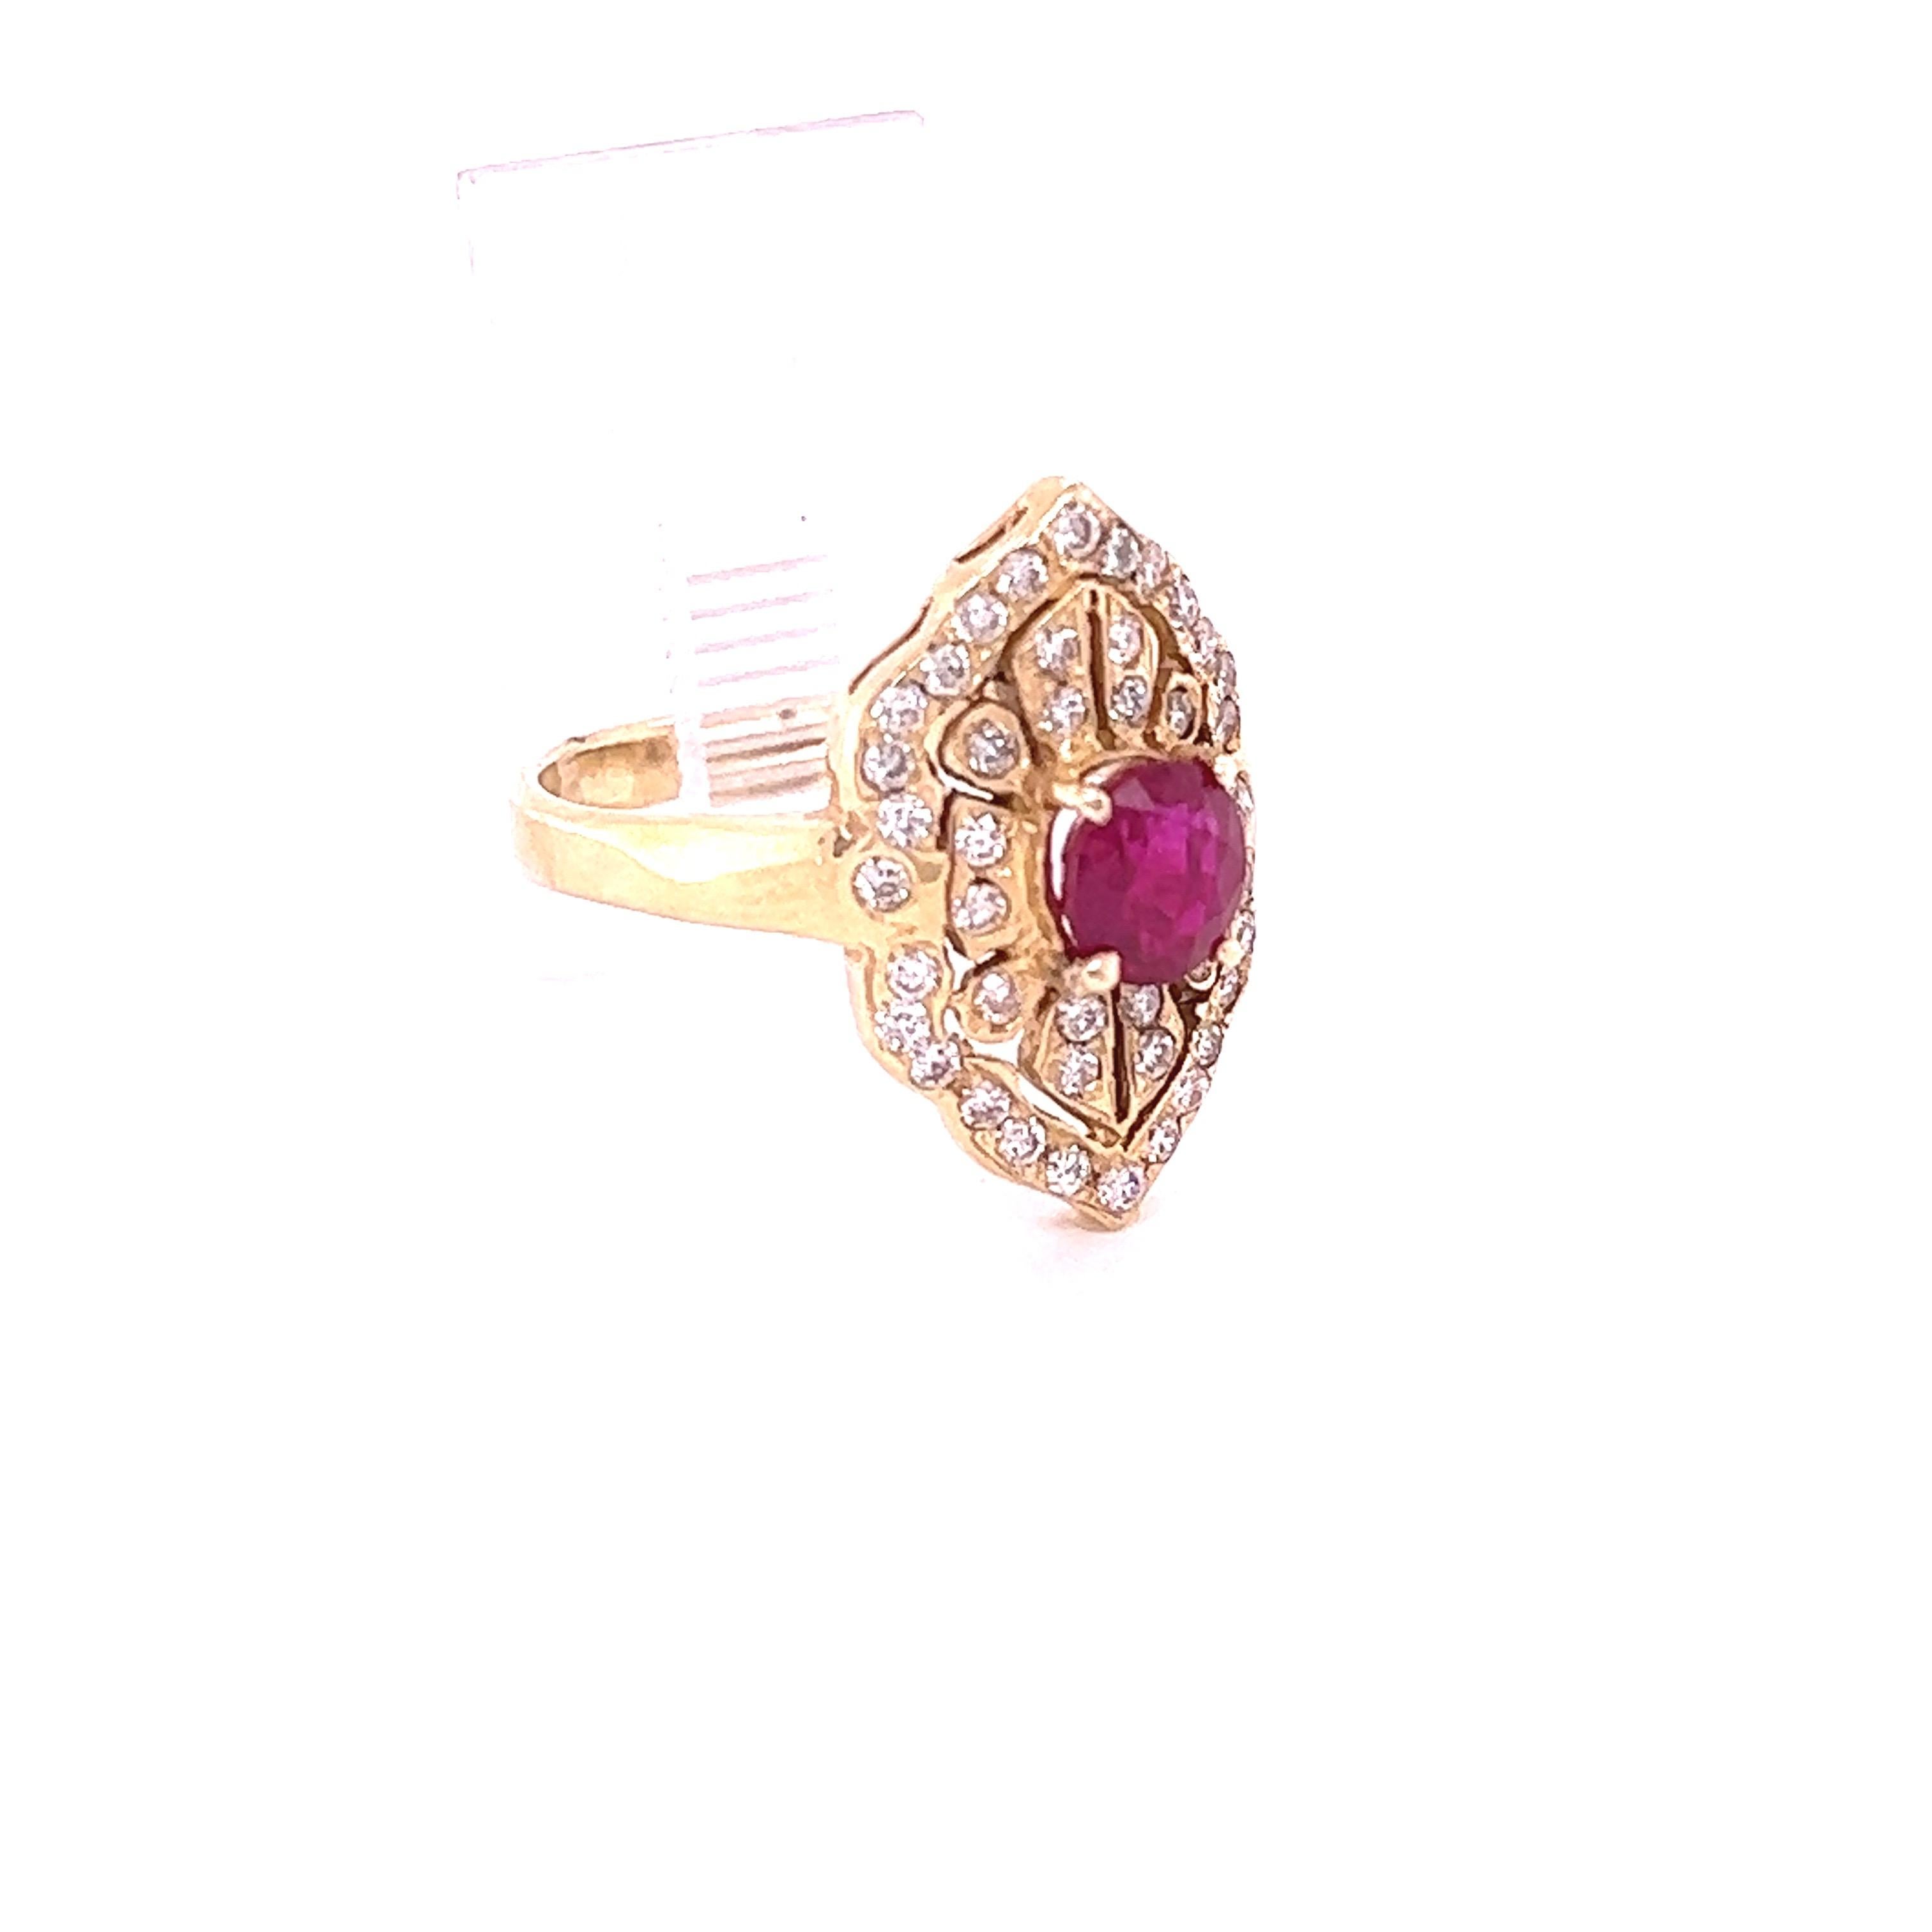 This ring has an Round/Oval Cut Ruby that weighs 1.10 carats and 38 Round Cut Diamonds that weigh 0.54 carats with a clarity and color of VS-H. The Ruby measures at approximately 5 mm. 

The ring is casted in 14K Yellow Gold and weighs approximately